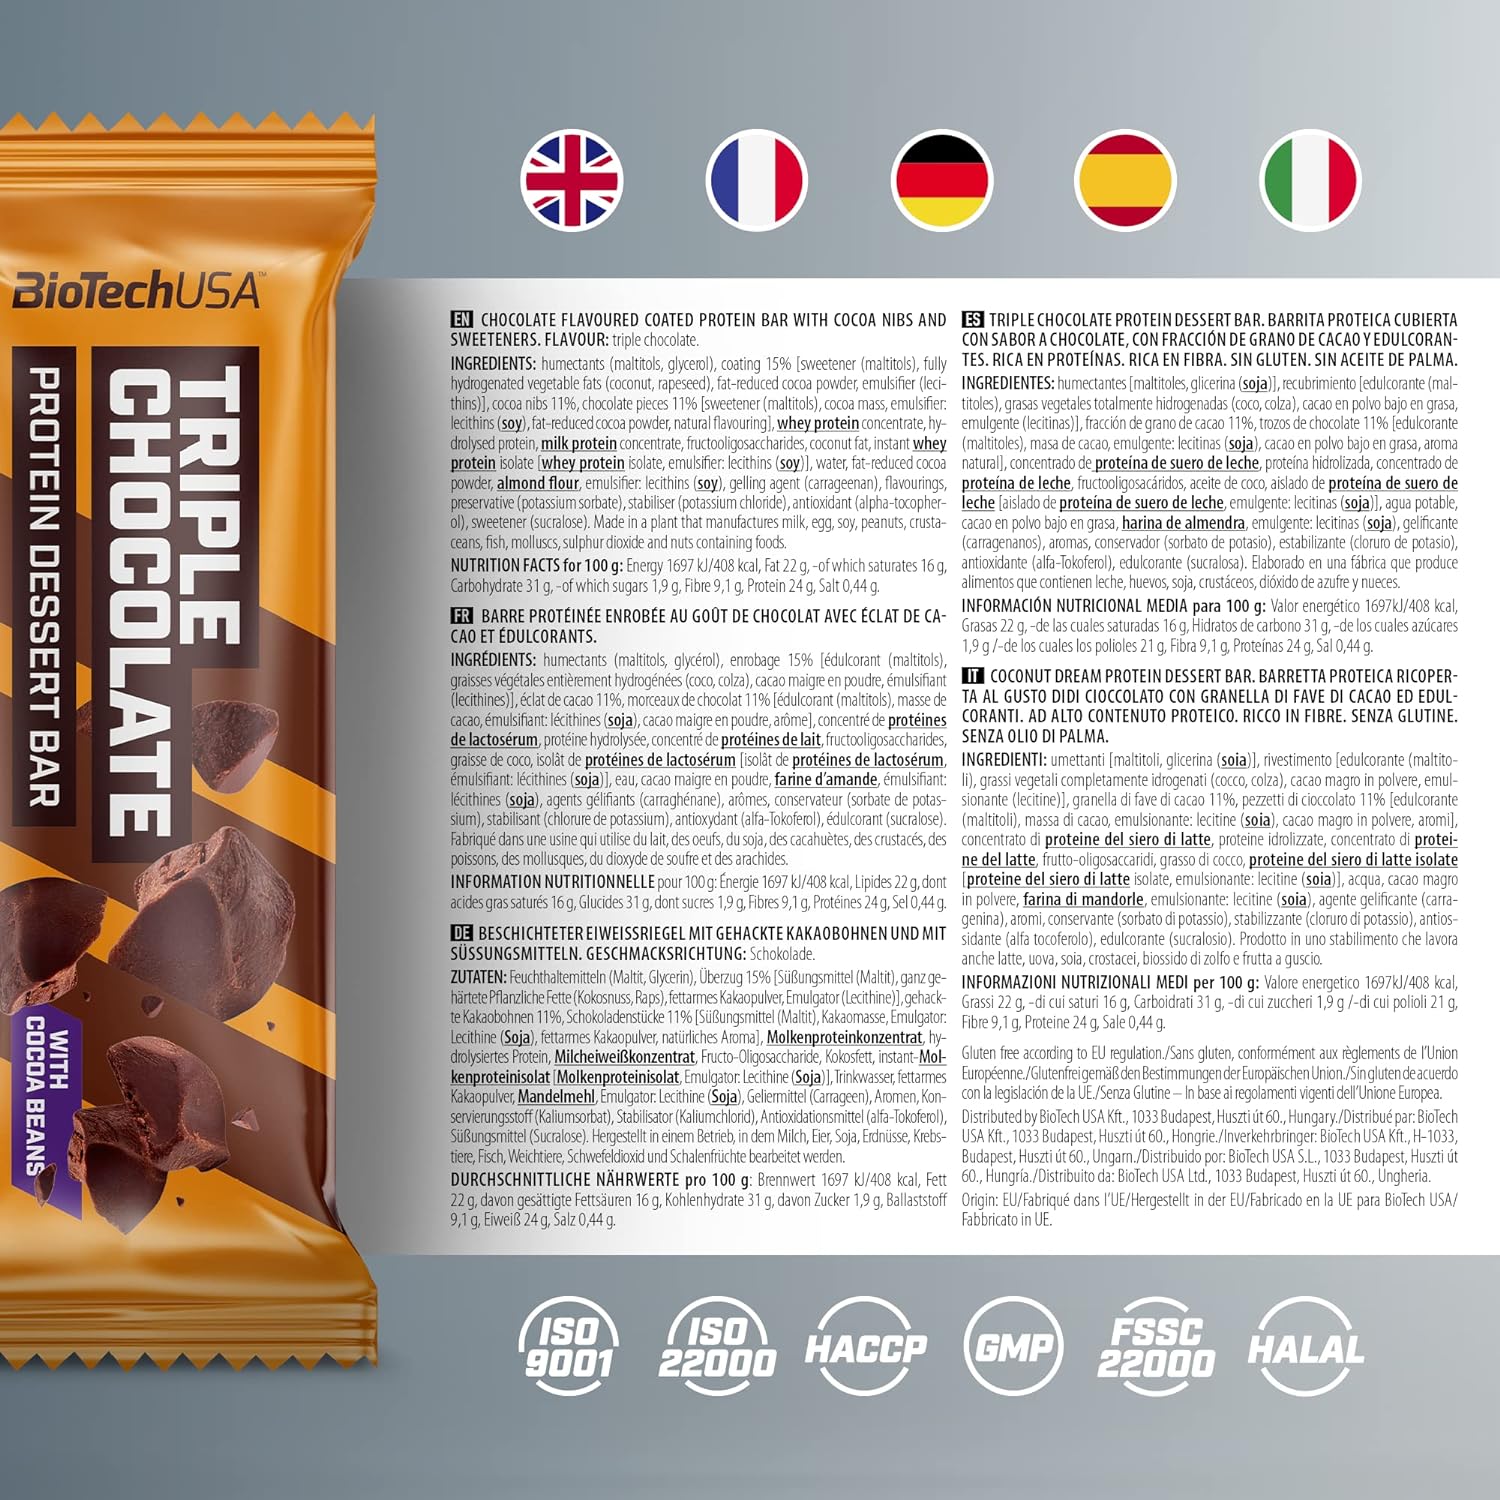 BioTechUSA Protein Dessert Bar, Coated protein bar with cocoa nibs and